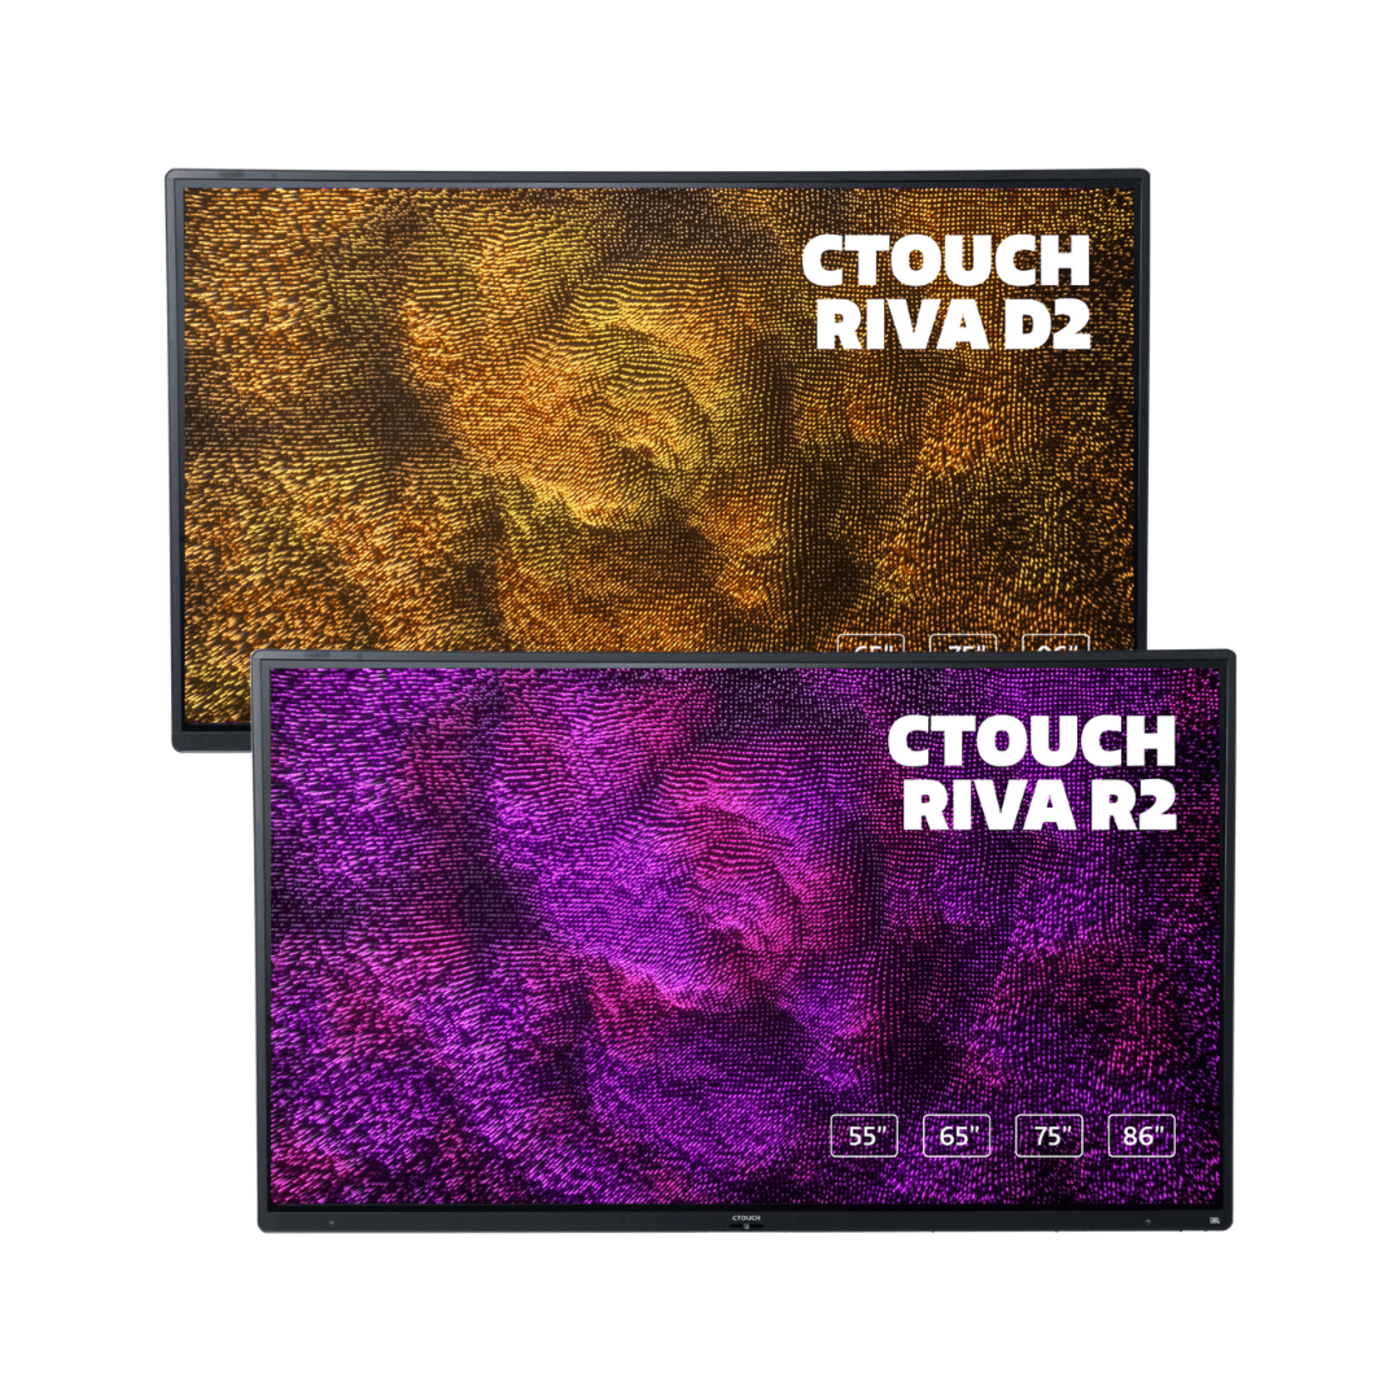 CTOUCH RIVA Screens